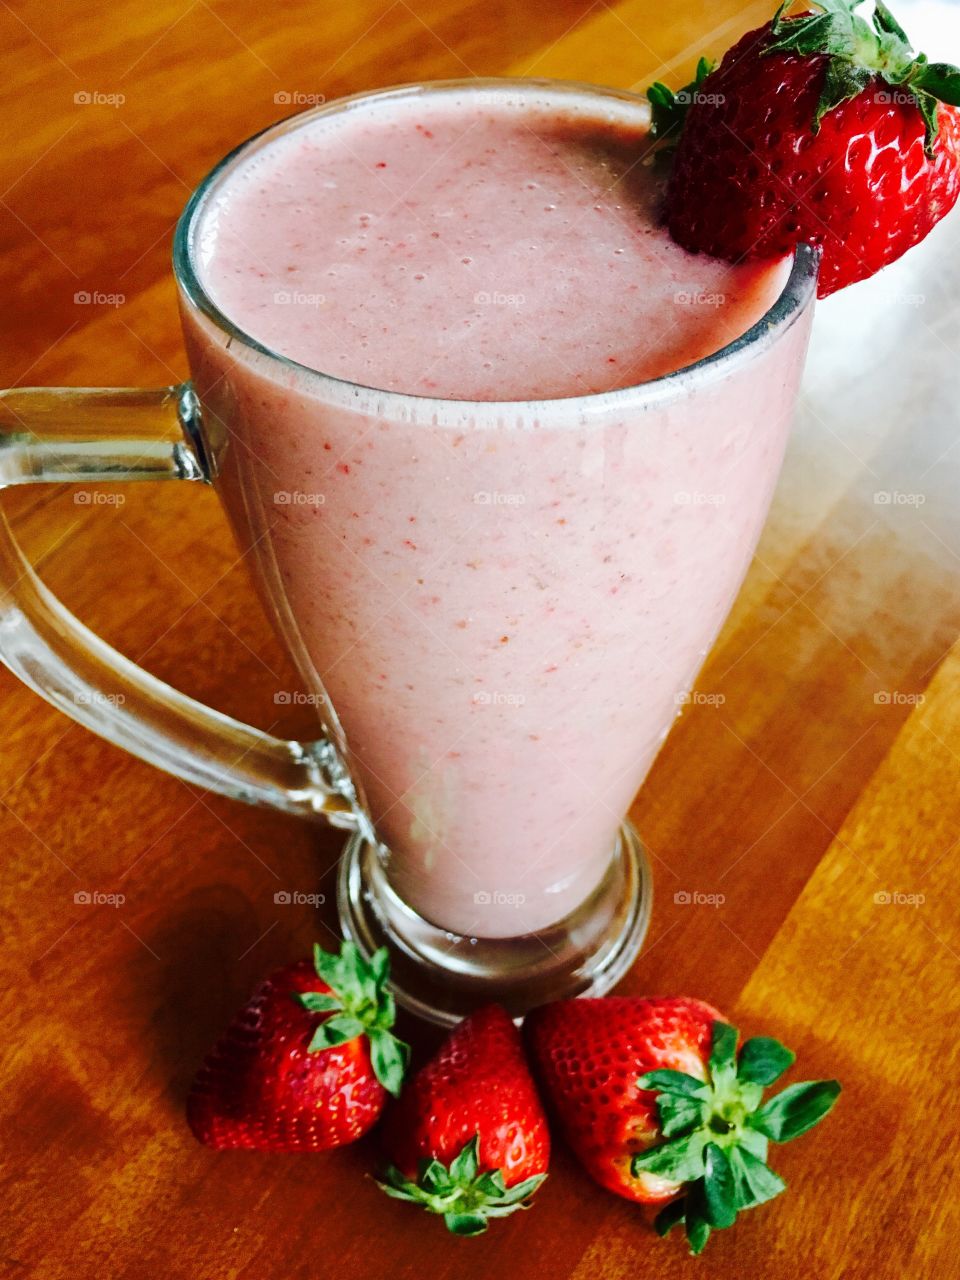 Fresh strawberry and banana smoothie in a tall glass. Garnished with a strawberry and surrounded by more berries on a wooden table. 